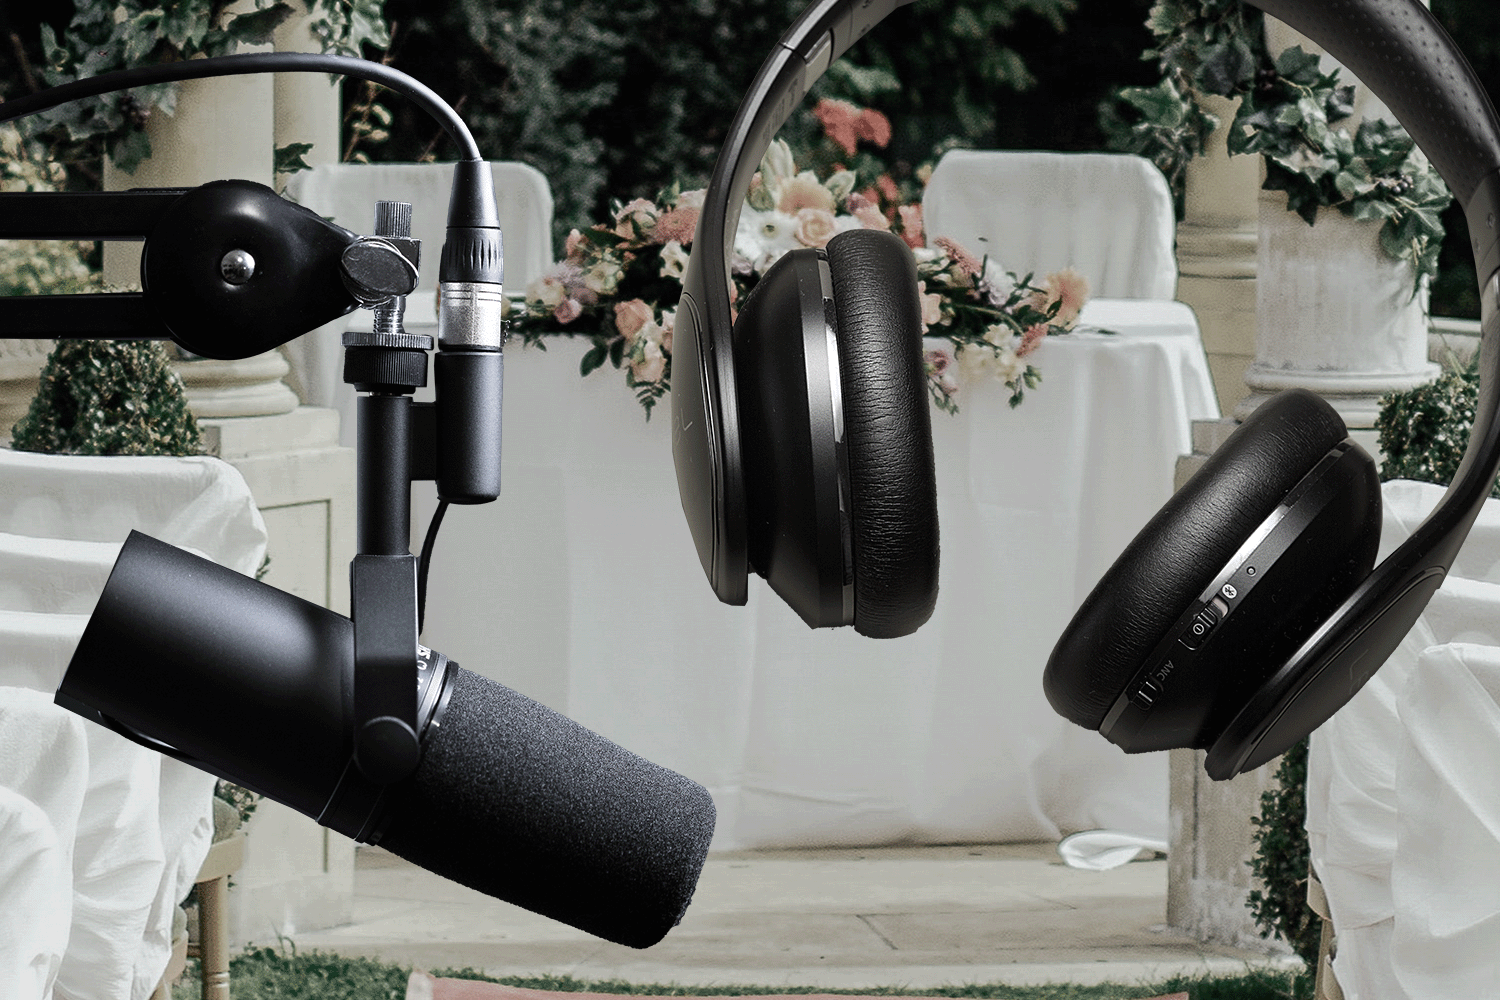 Podcasts about Weddings offering humor and great advice.